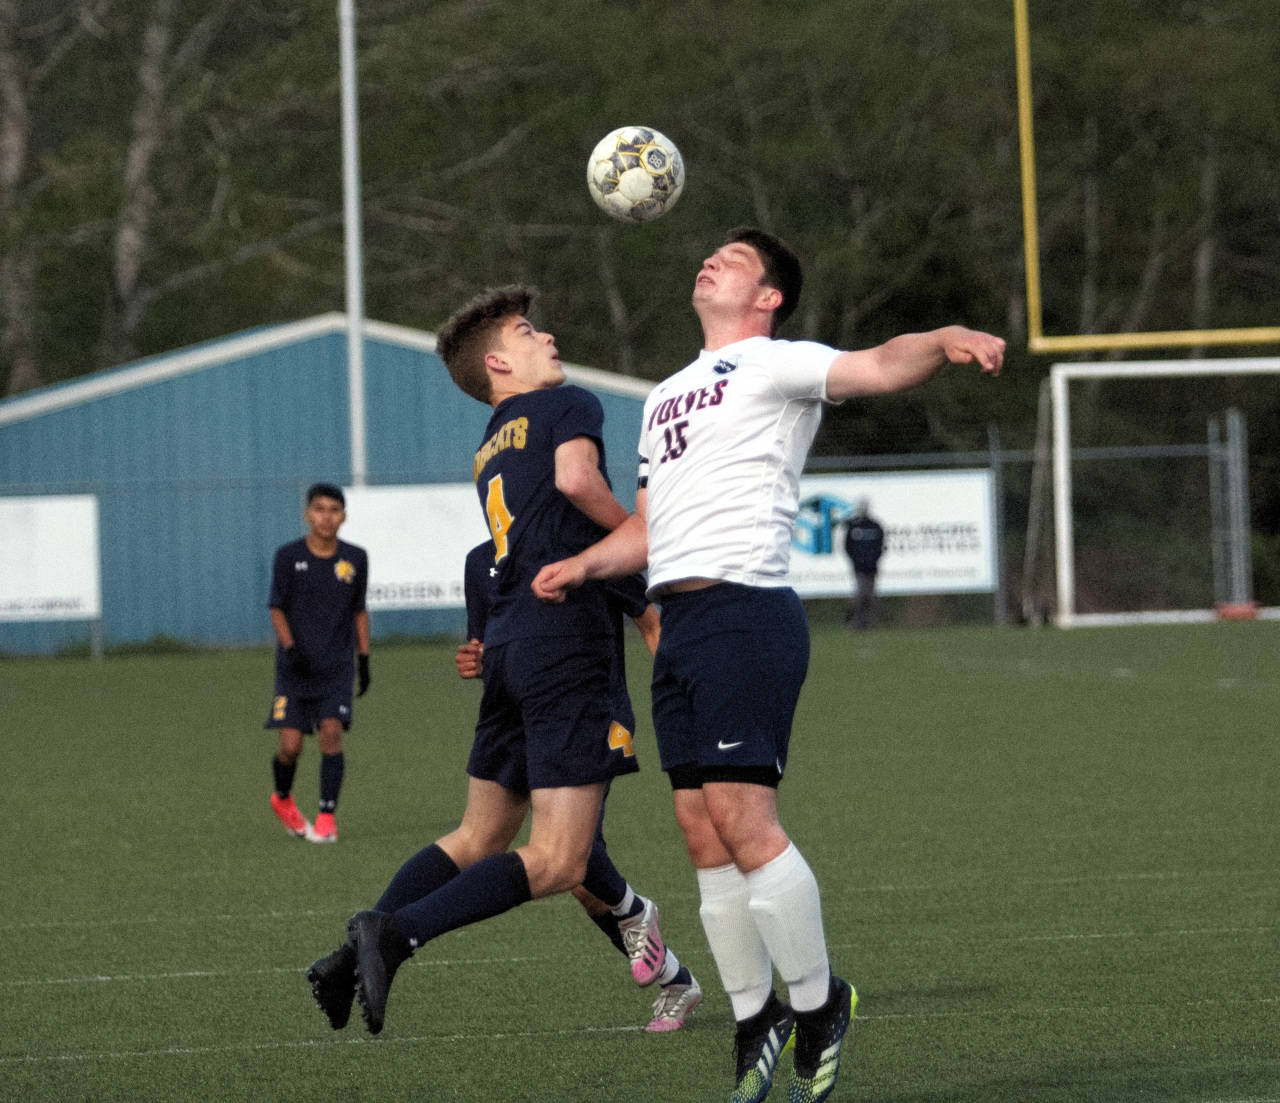 RYAN SPARKS | THE DAILY WORLD Aberdeen’s Kaleb Myers, left, and Black Hills’ Calvin Griffiths compete for a header during Aberdeen’s 4-0 win in the first round of the 2A District 4 Tournament on Saturday at Stewart Field in Aberdeen.